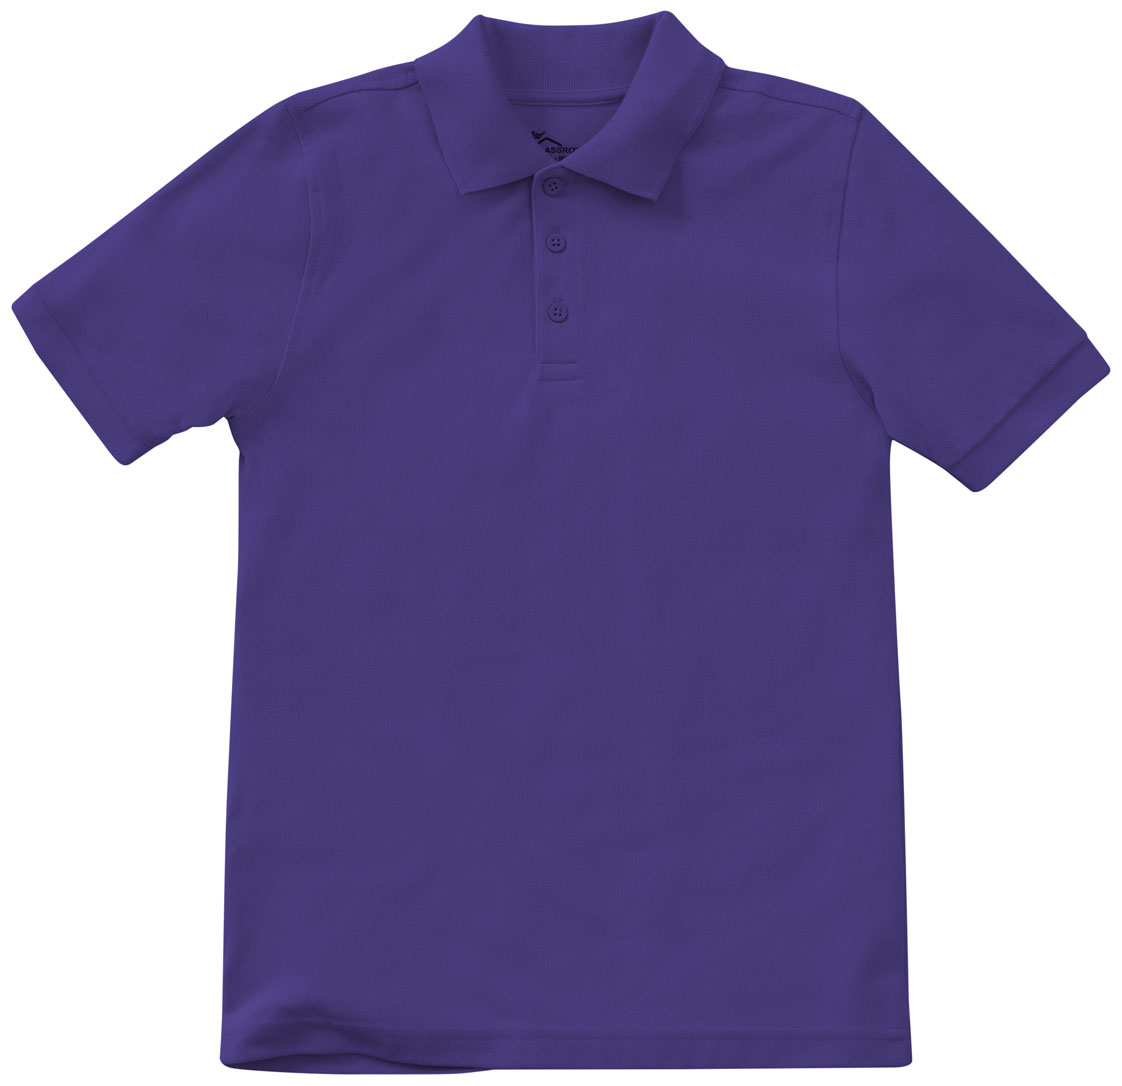  Youth - Unisex Short Sleeve Pique Polo - CR832Y